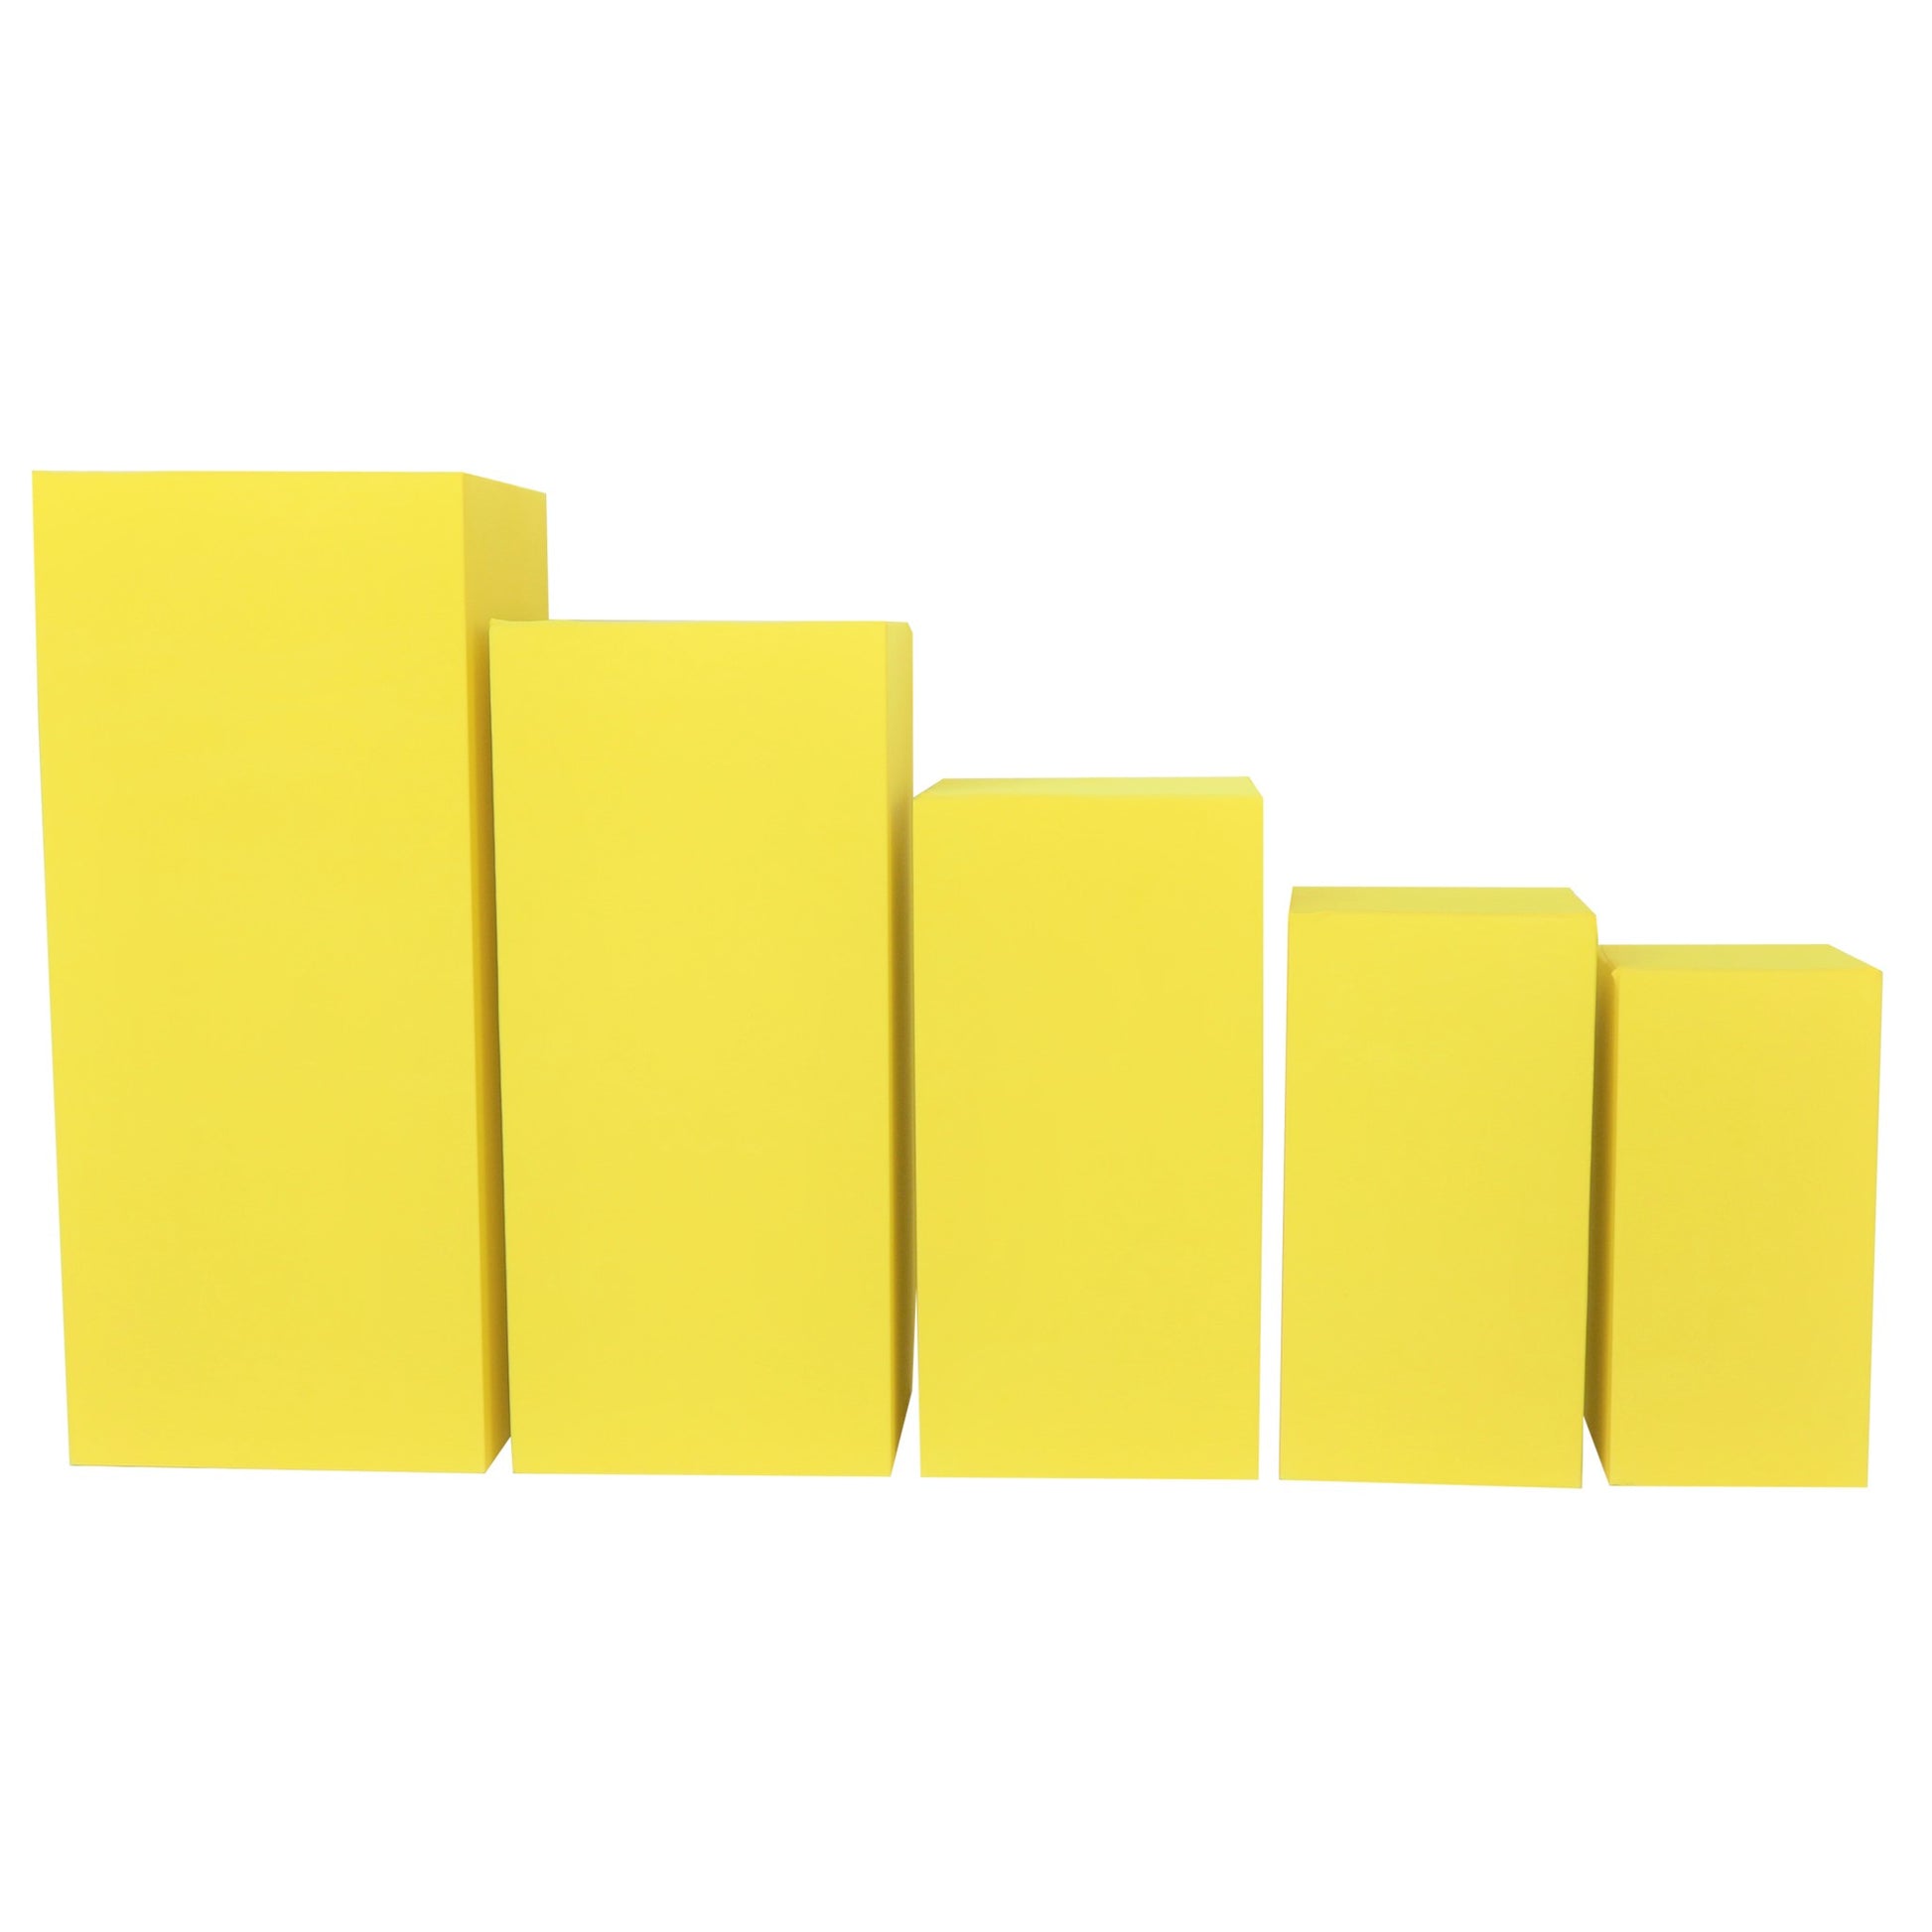 Spandex Covers for Square Metal Pillar Pedestal Stands 5 pcs/set - Canary Yellow